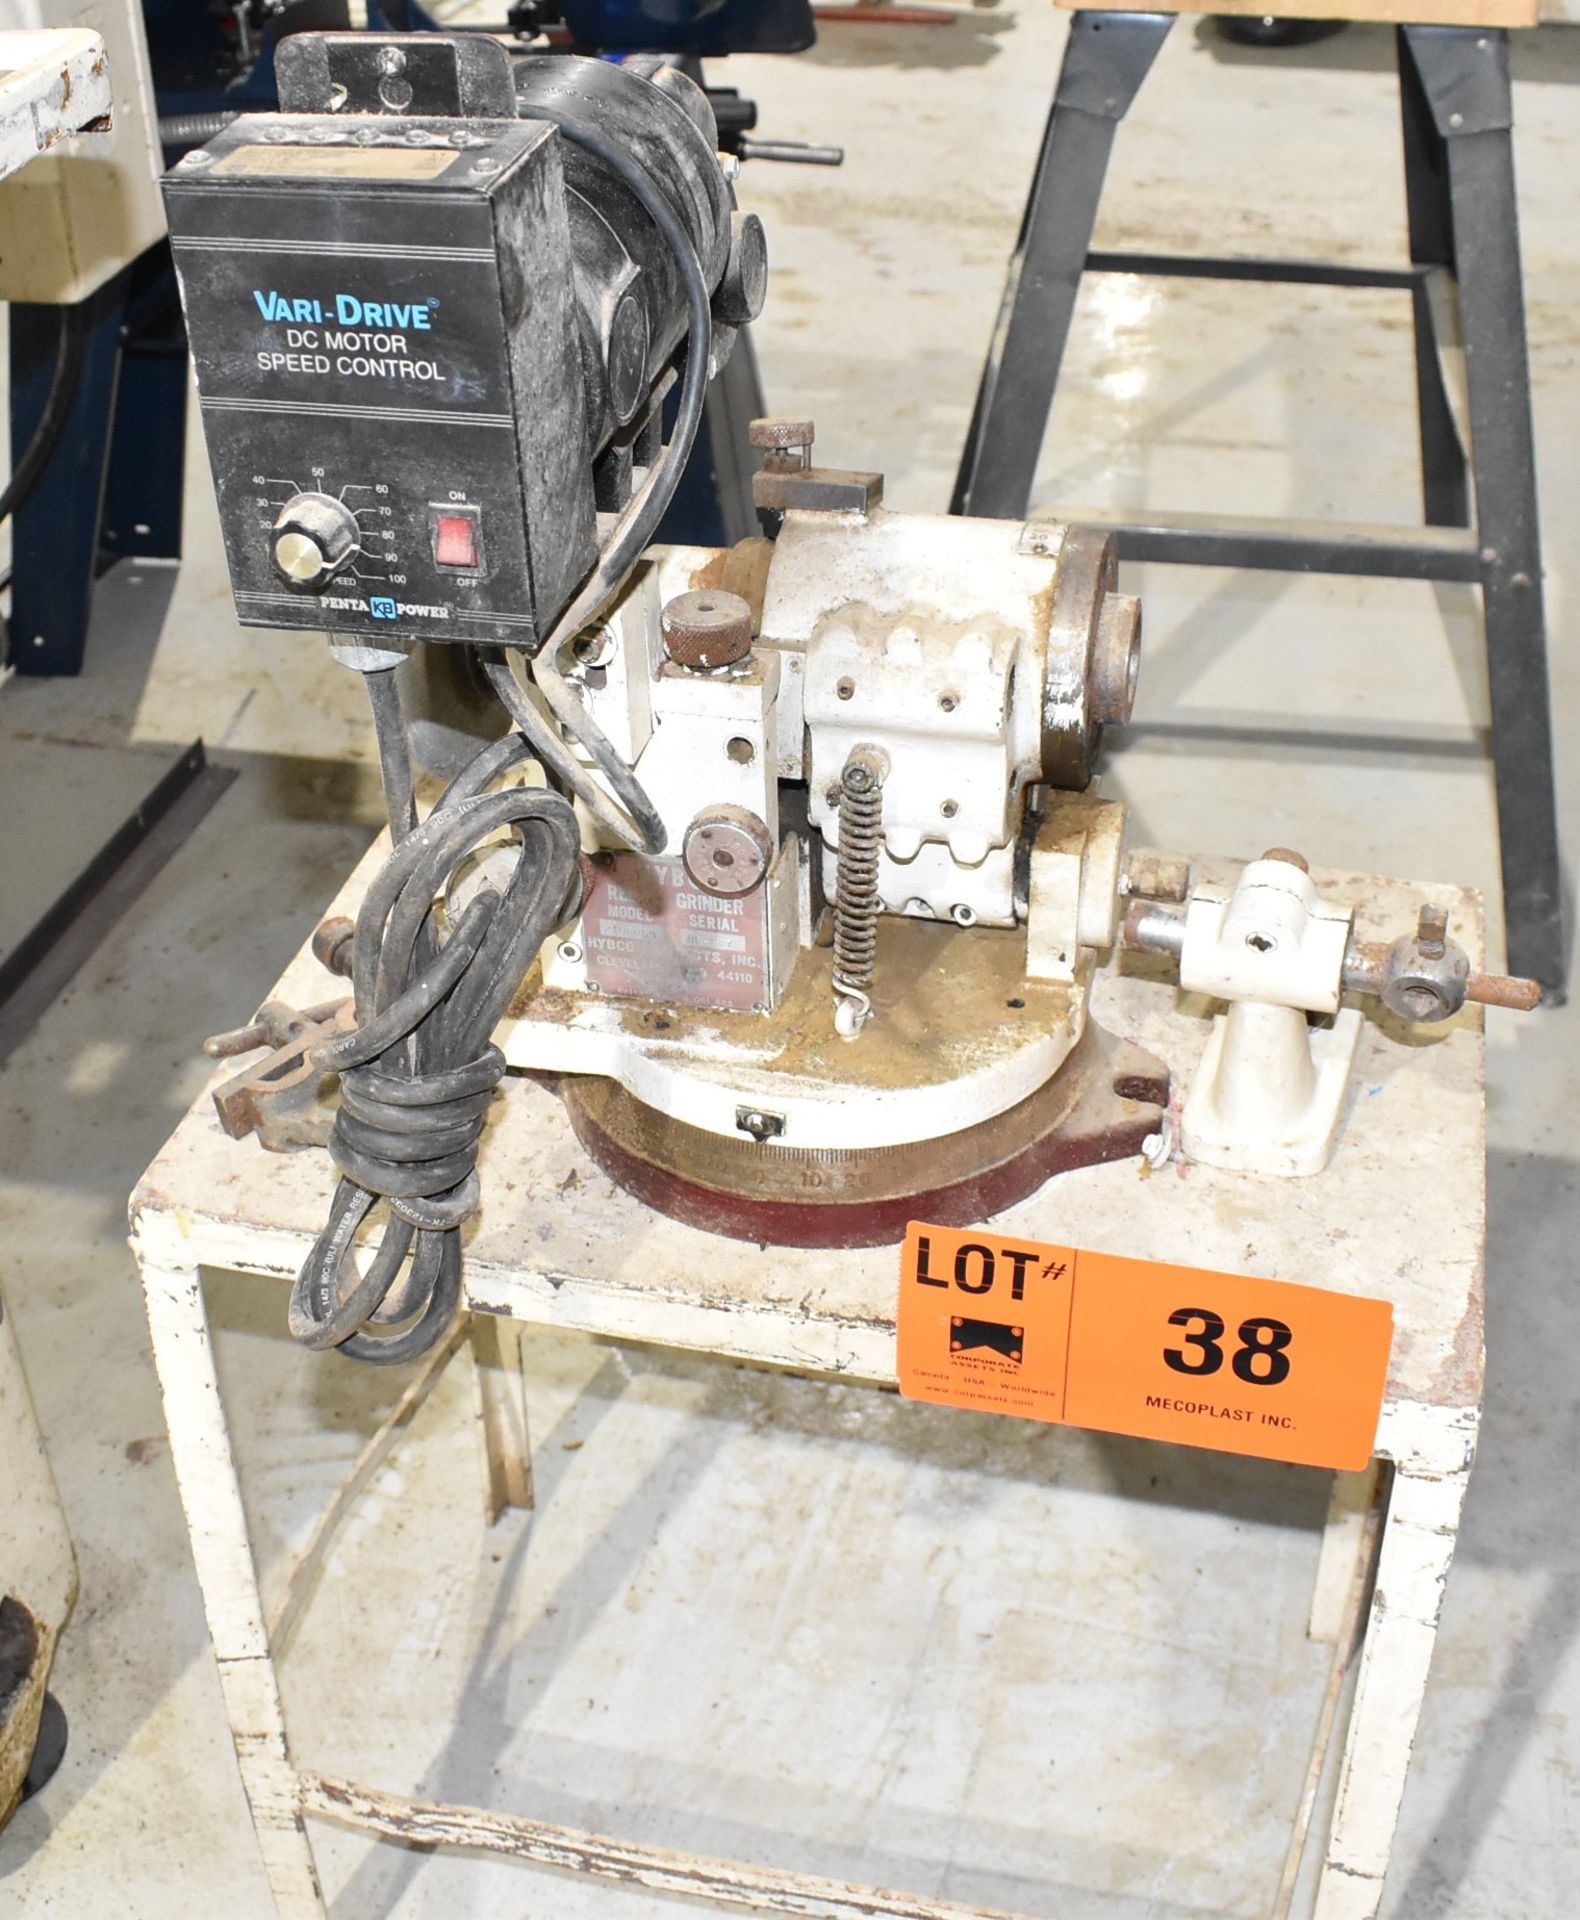 HYBCO 2100-SB RELIEF GRINDER ATTACHMENT, S/N RF-887